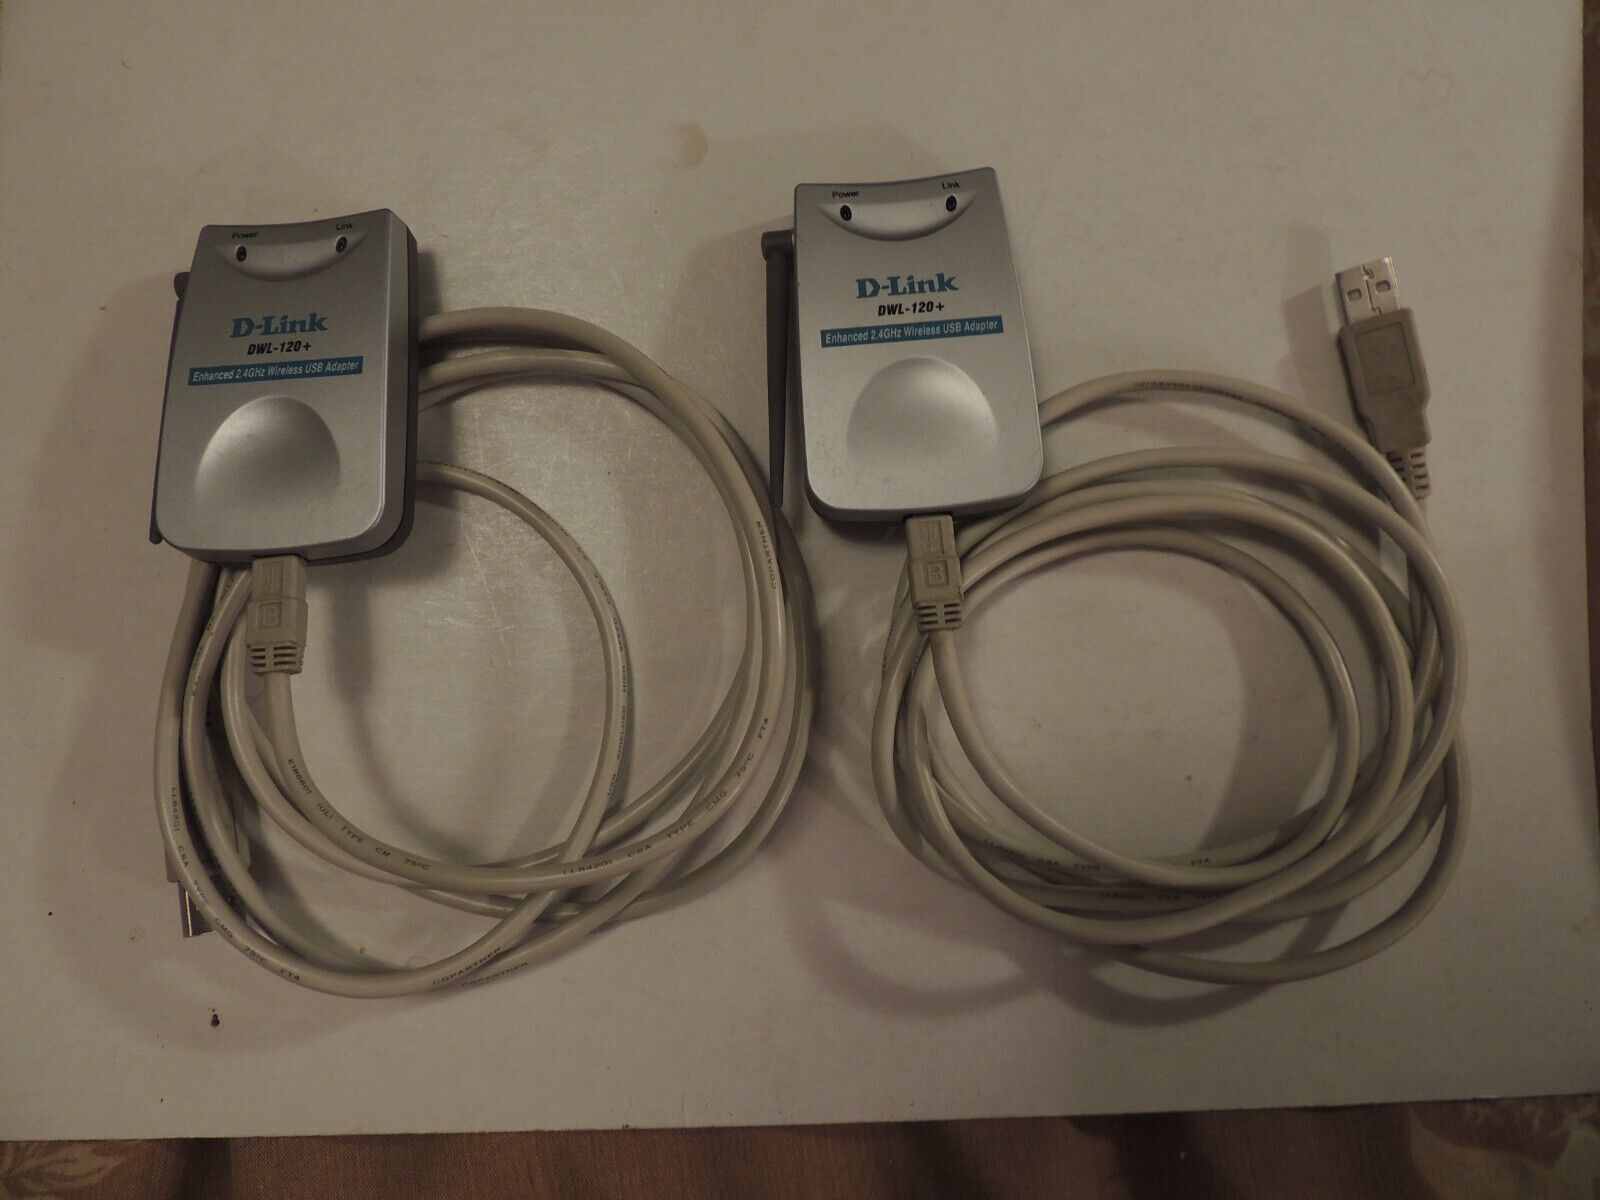 Lot of 2: D-Link Model: DWL-120+  2.4GHz Enhanced Wireless USB Adapter and Cable